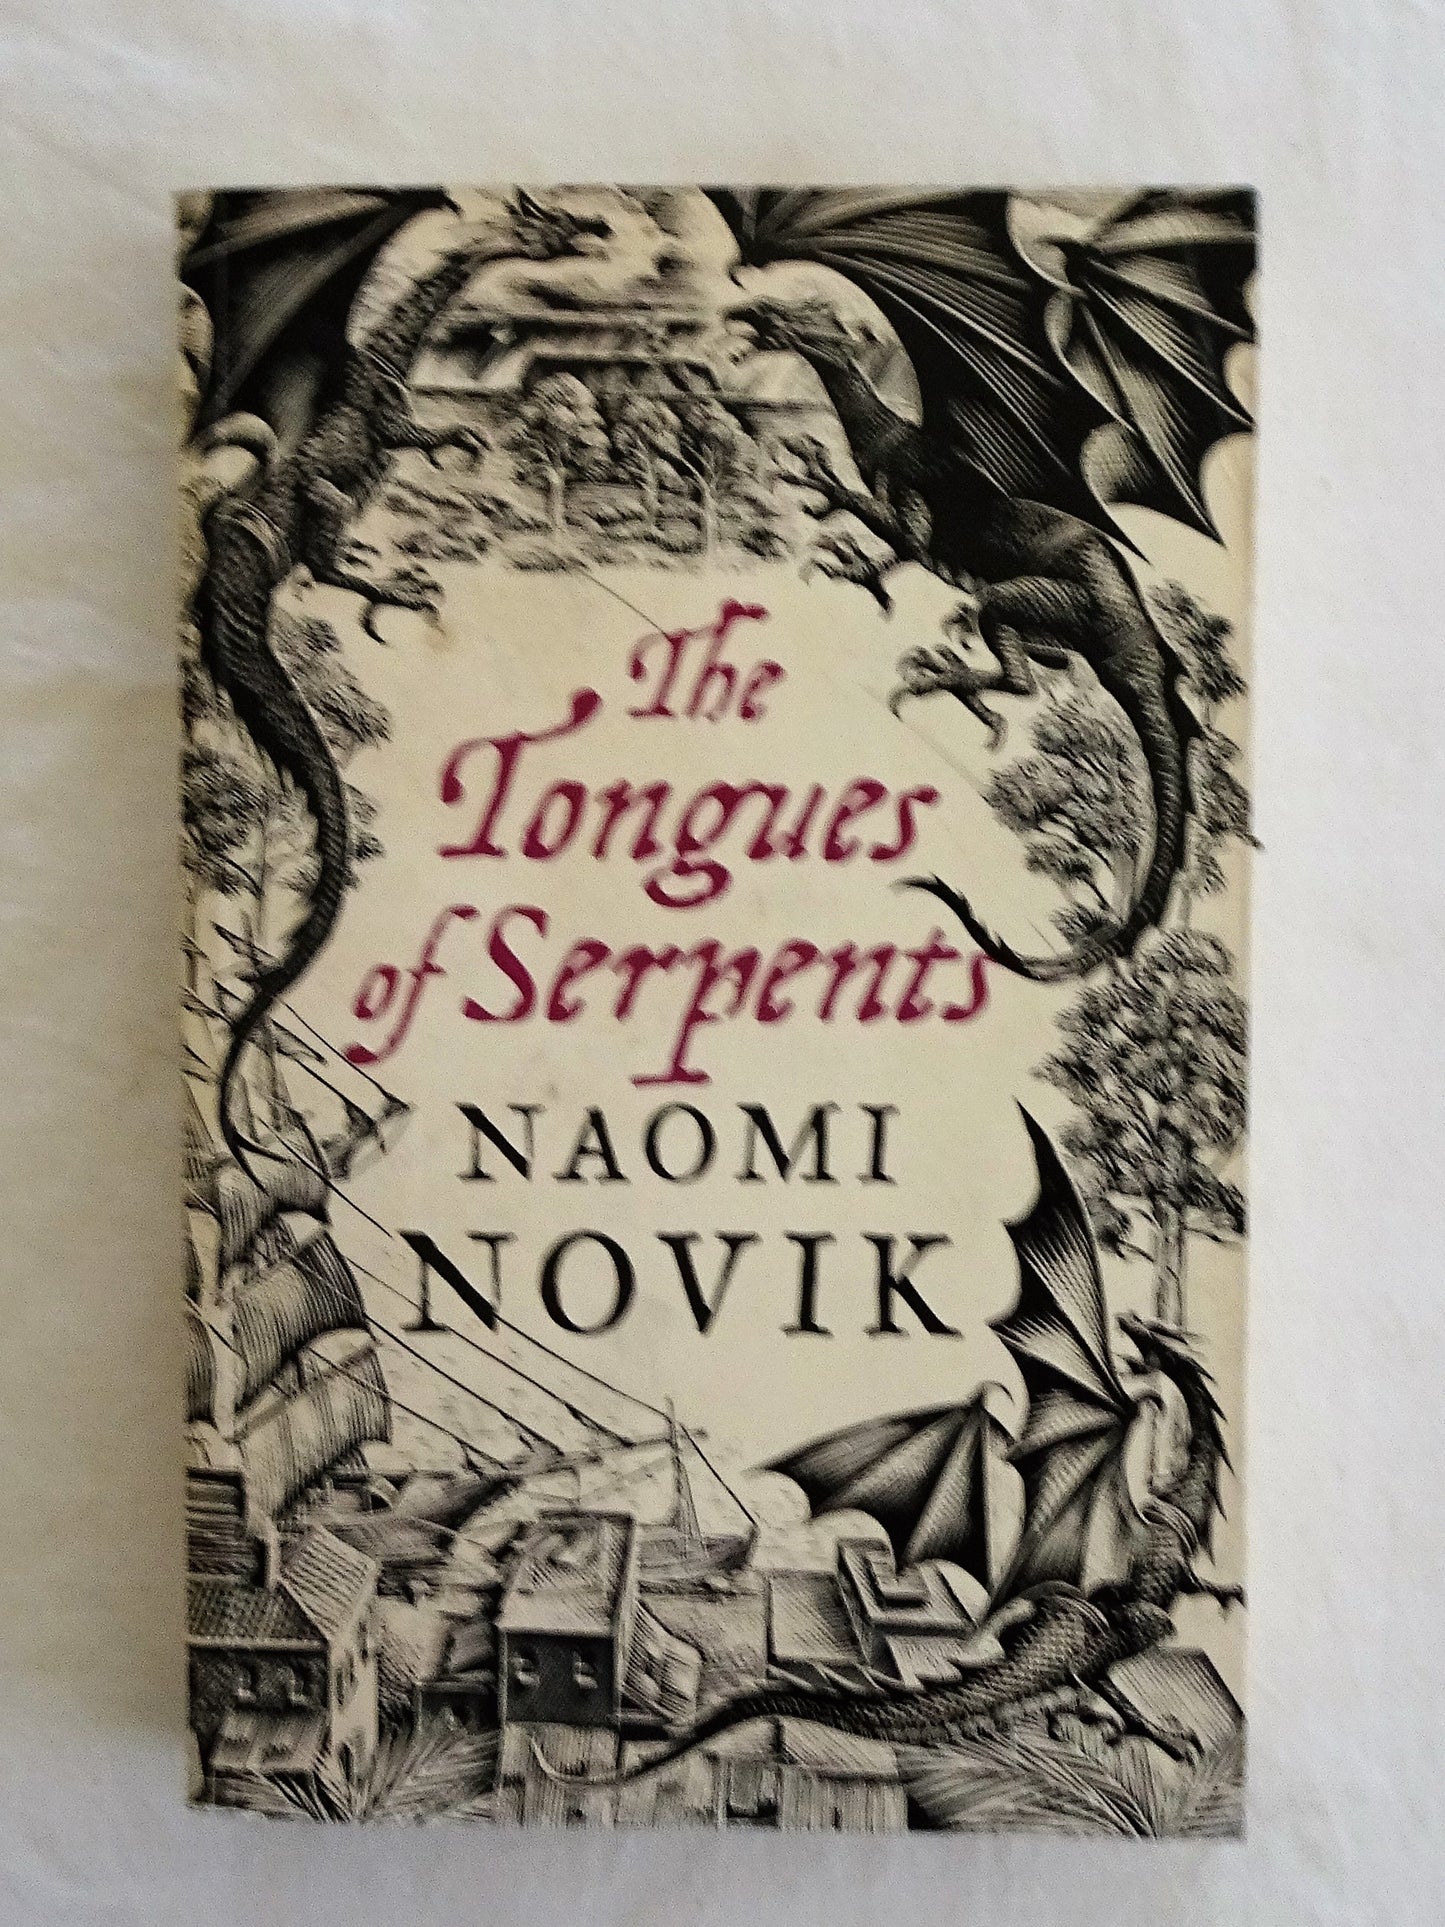 The Tongues of Serpents by Naomi Novik